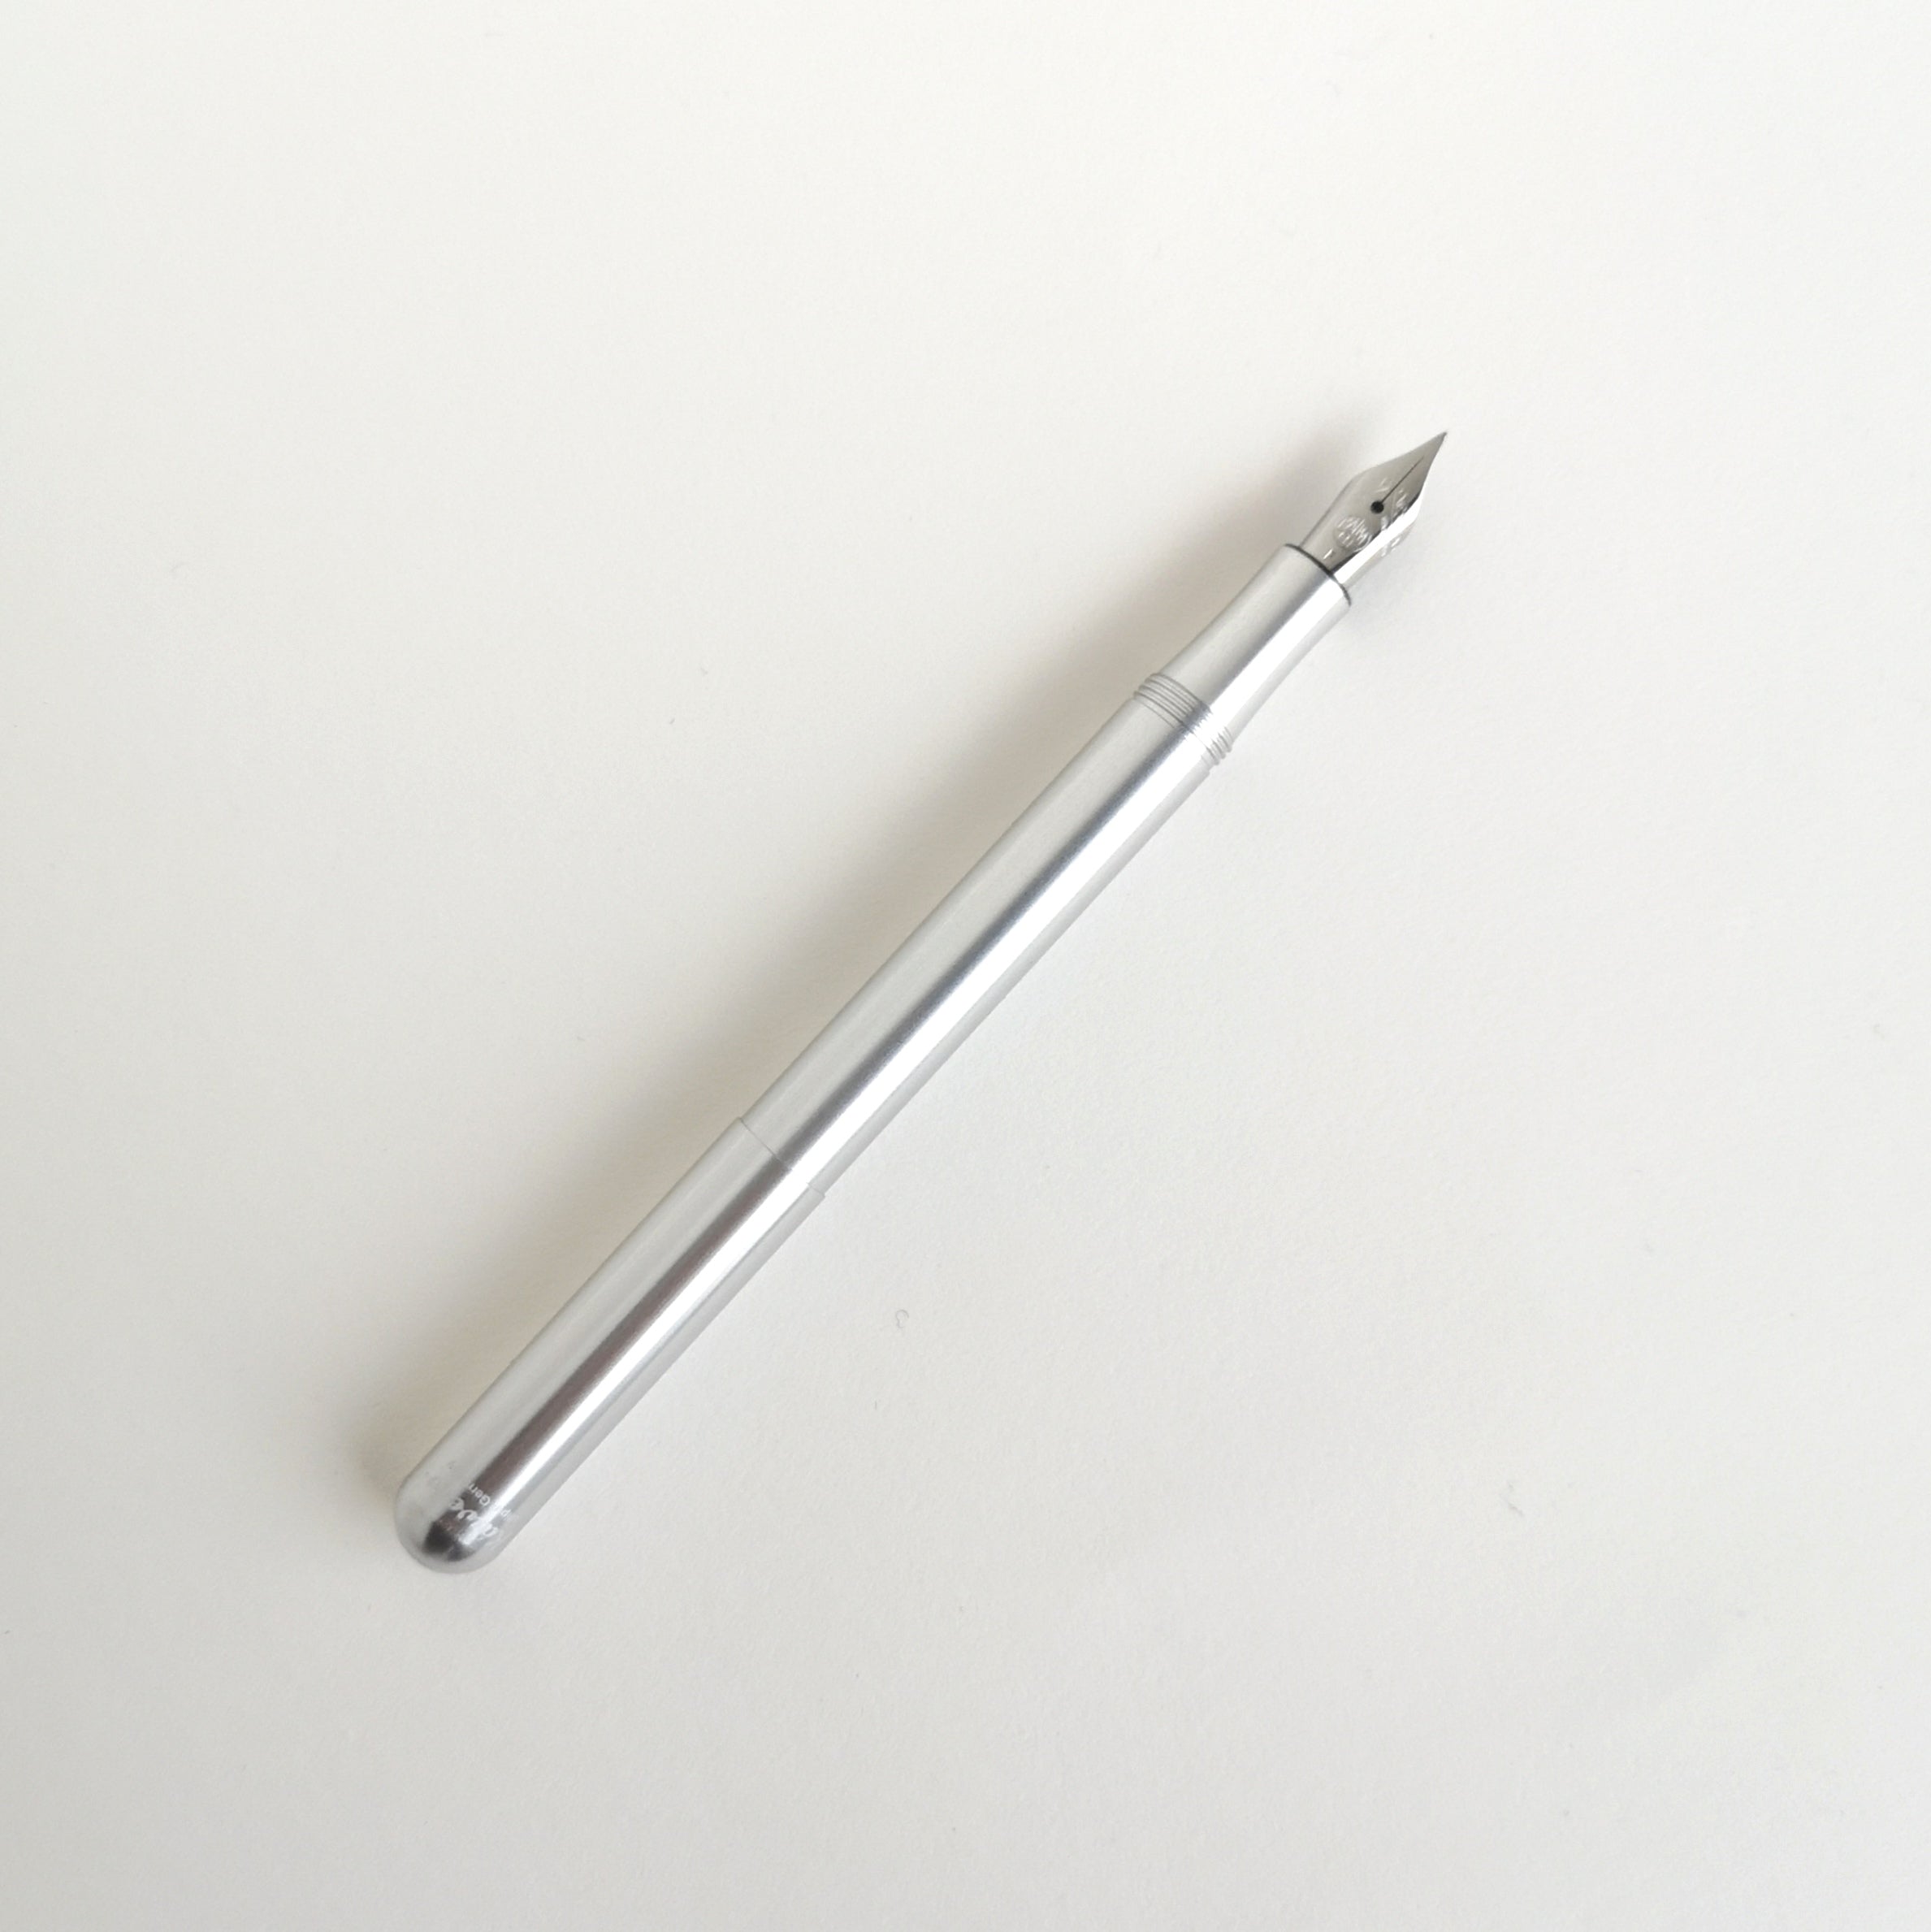 Kaweco Silver Liliput Fountain Pen with cap posted